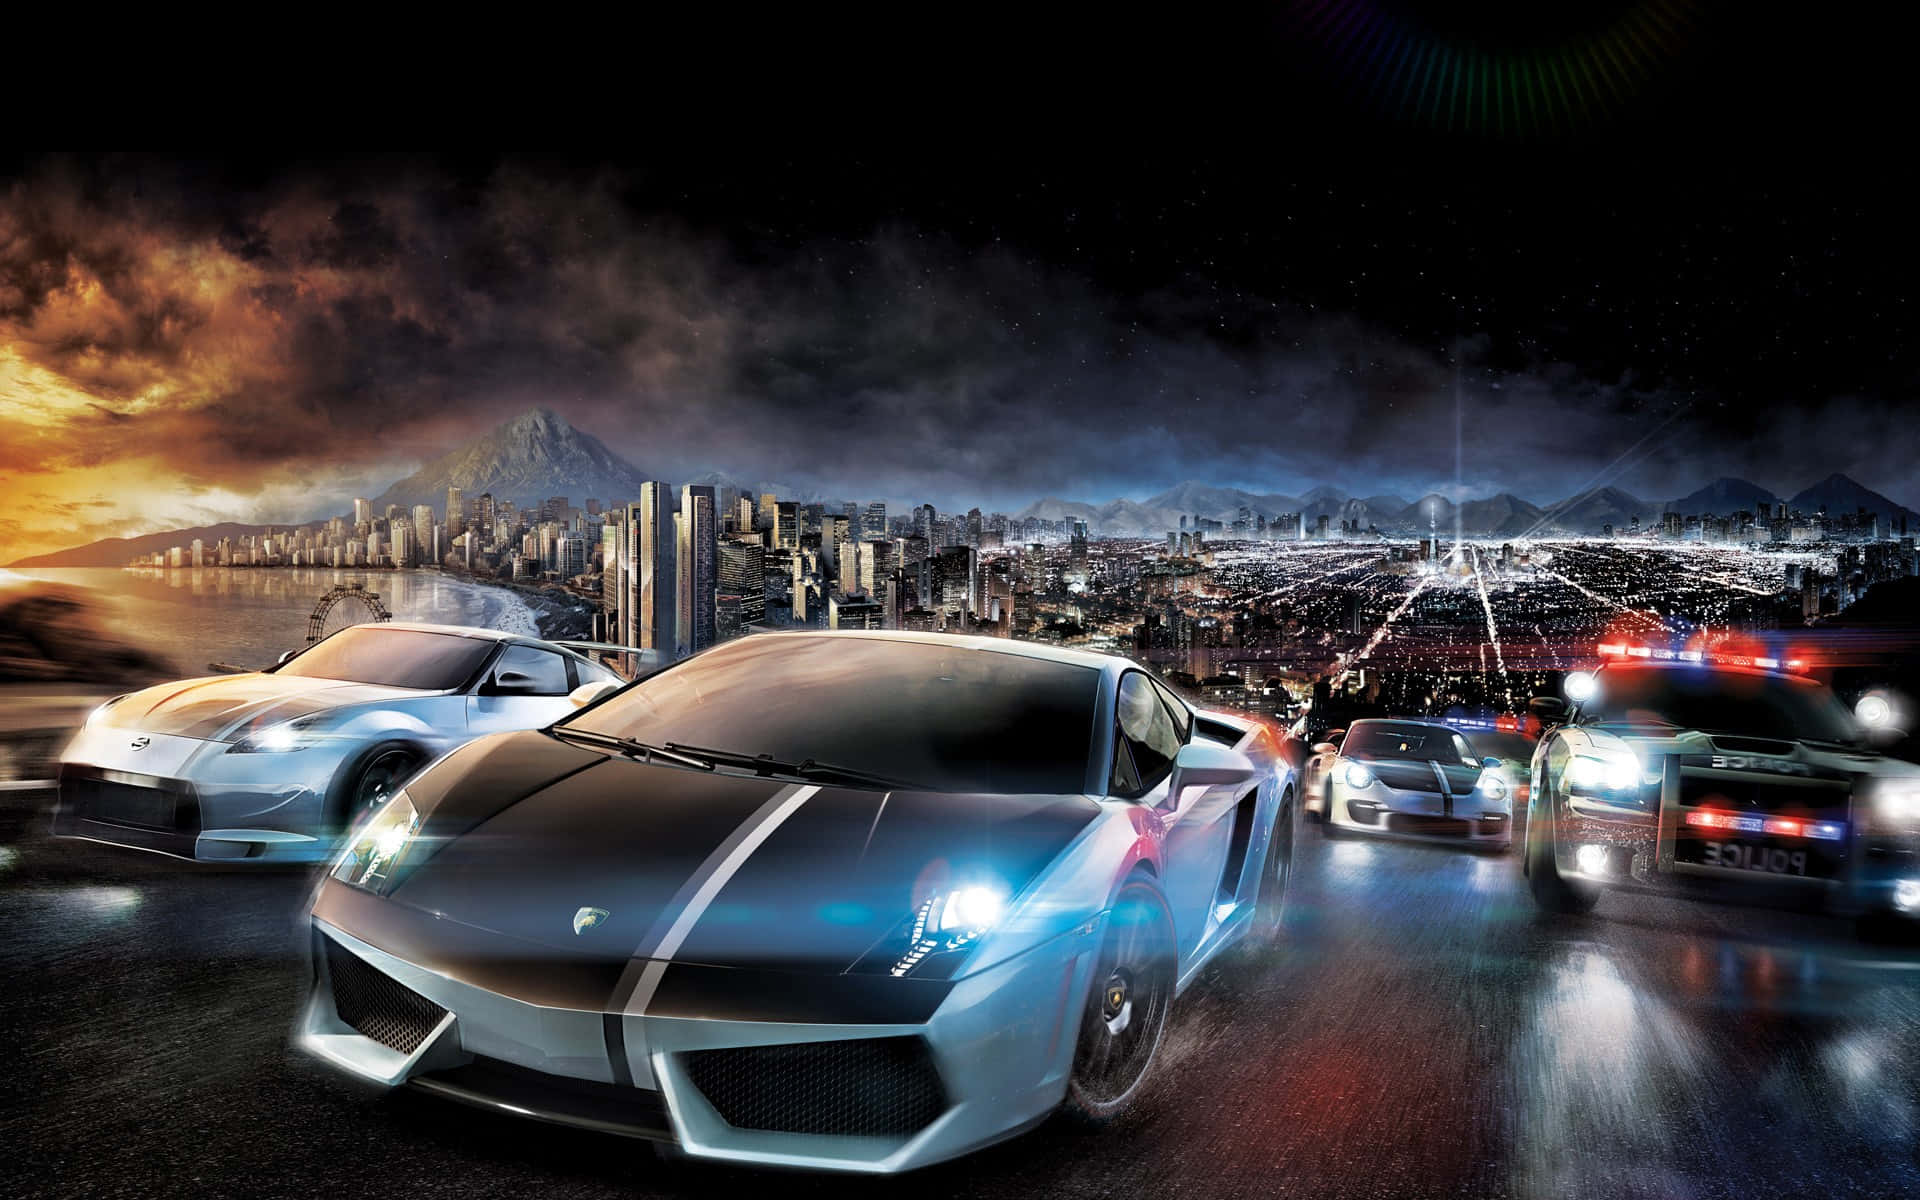 Get Ready to Race with Need for Speed Wallpaper